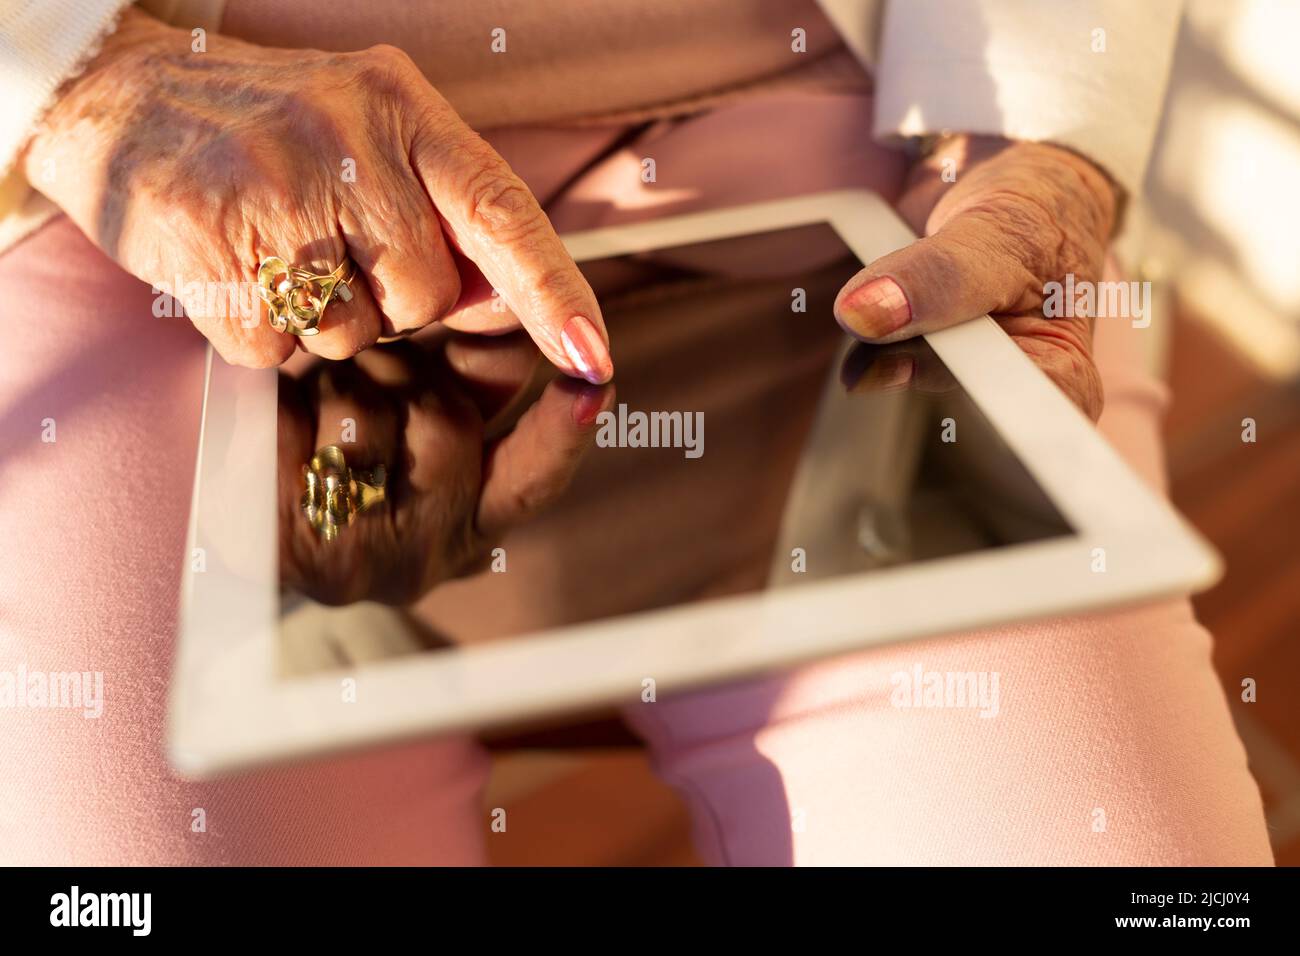 Close up of unrecognizable elderly person using a digital tablet. Concept of old people and new technologies. Stock Photo